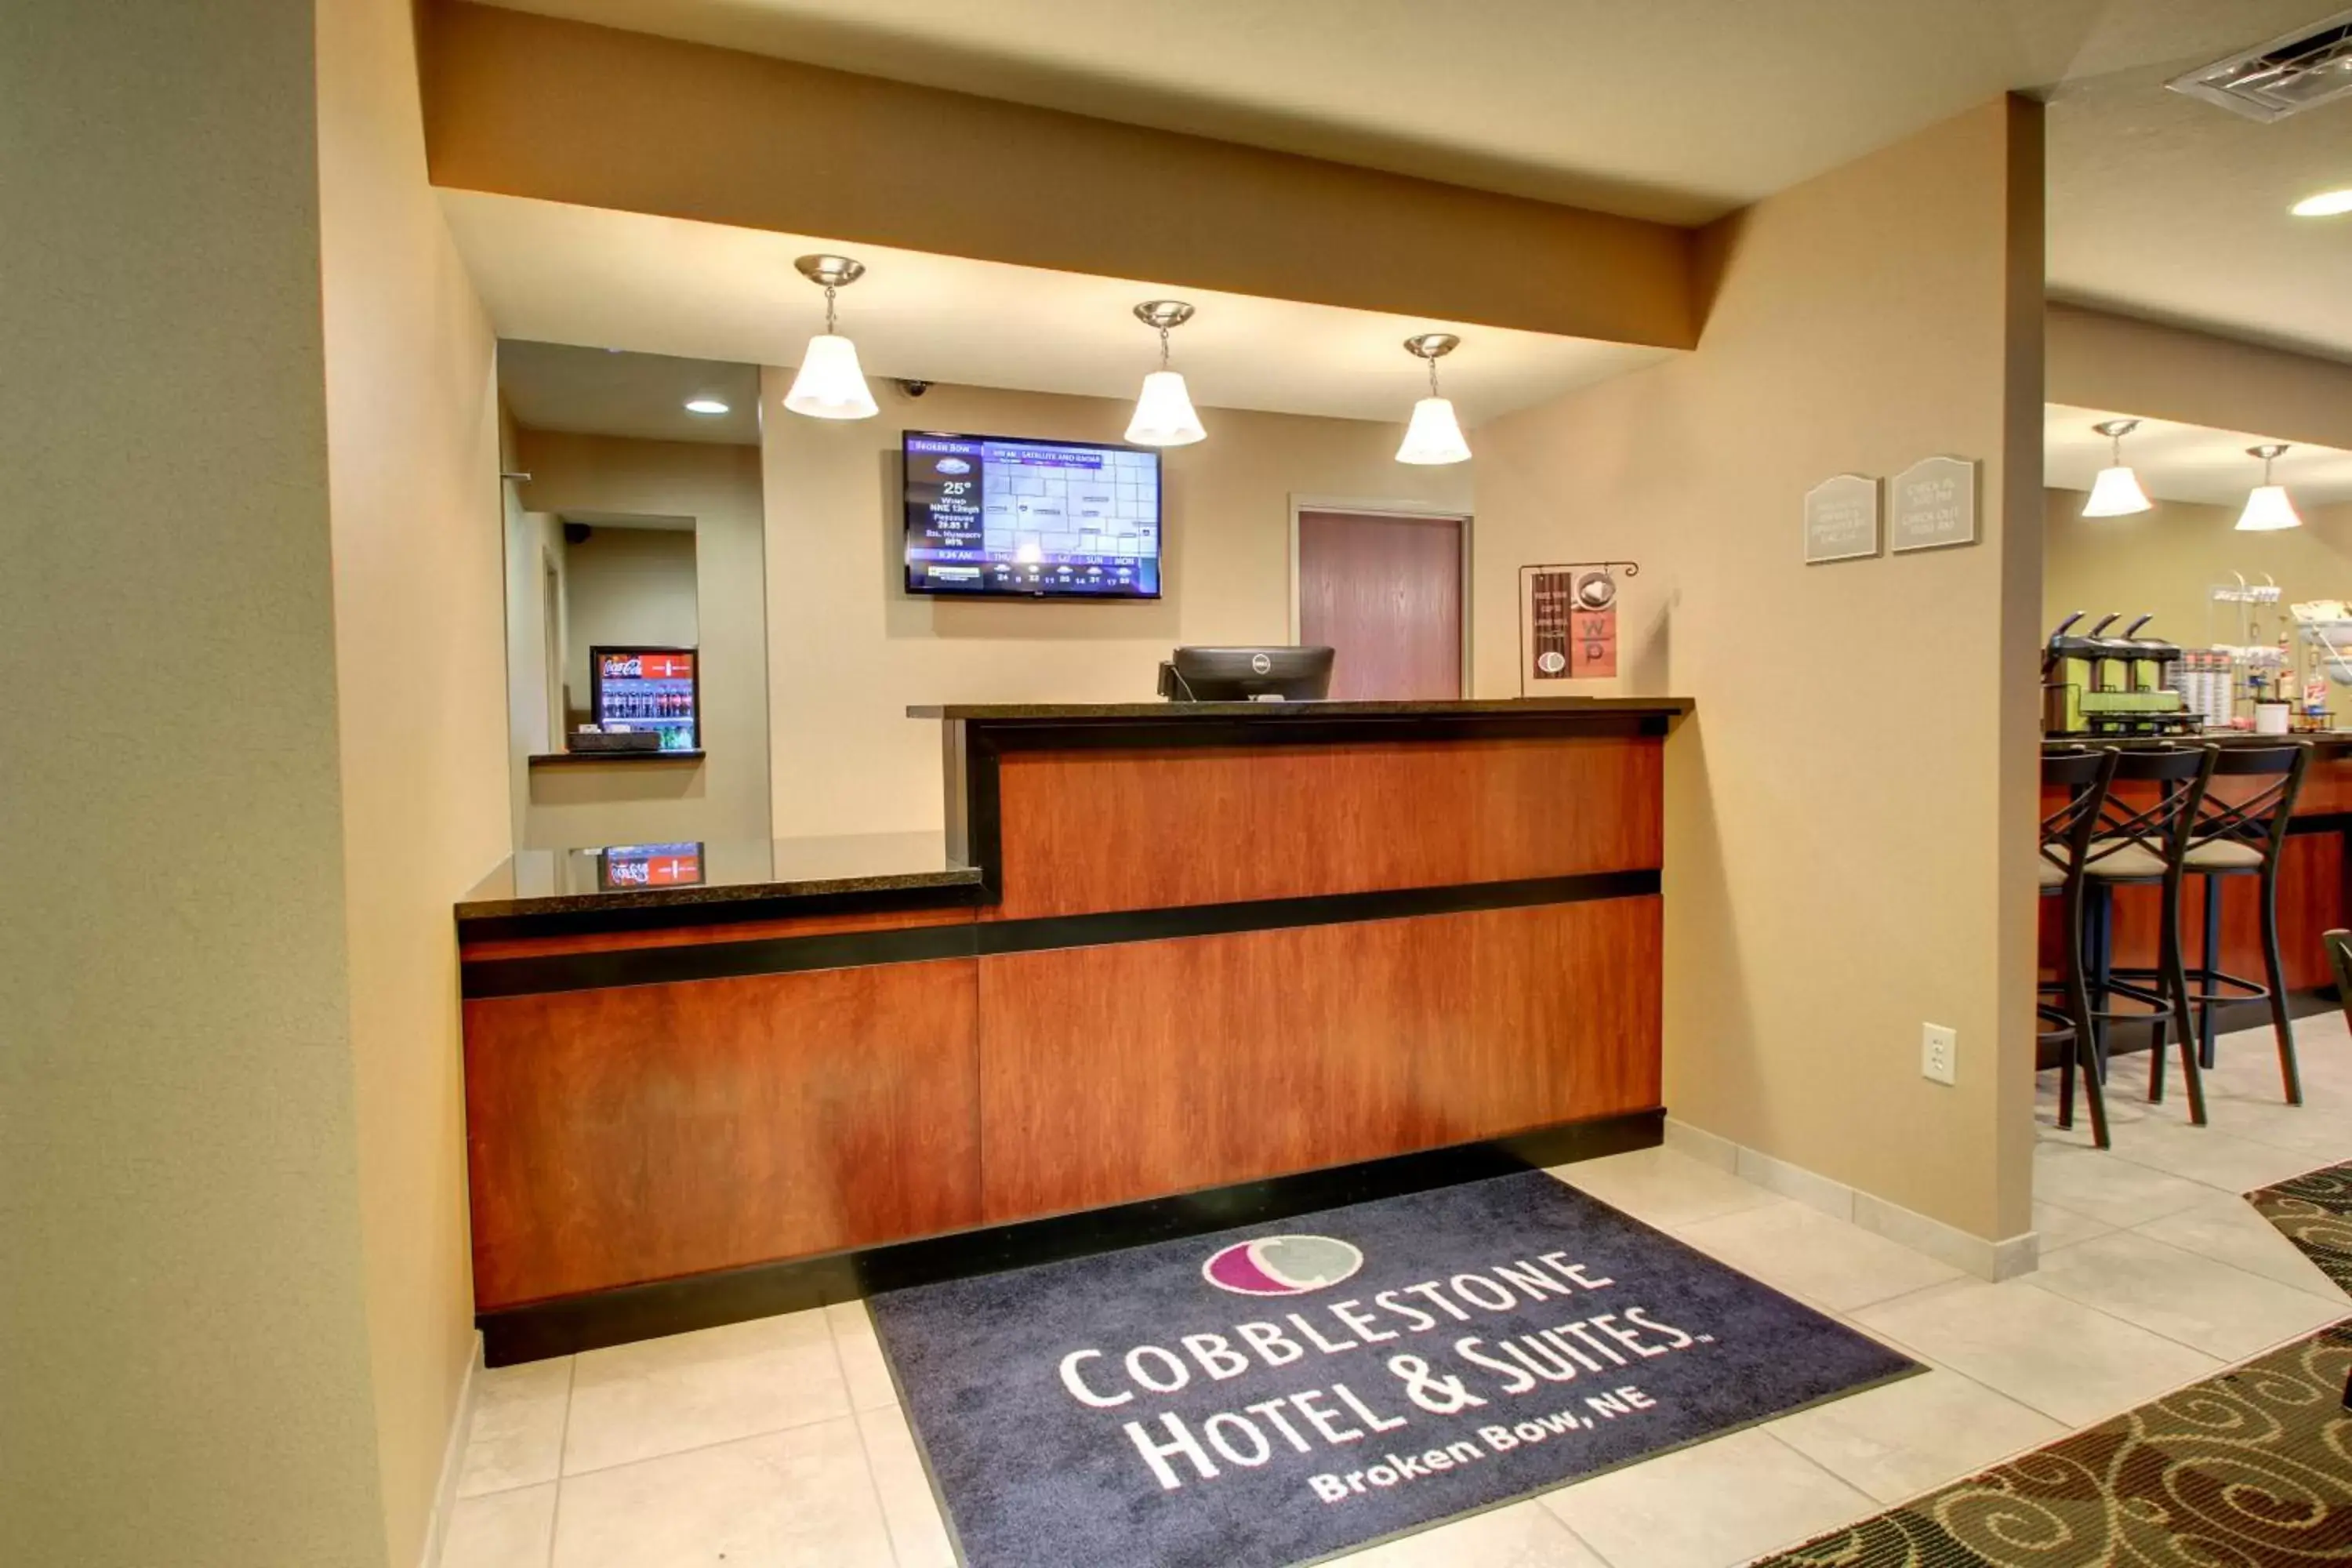 Dining area, Lobby/Reception in Cobblestone Hotel & Suites - Charlestown